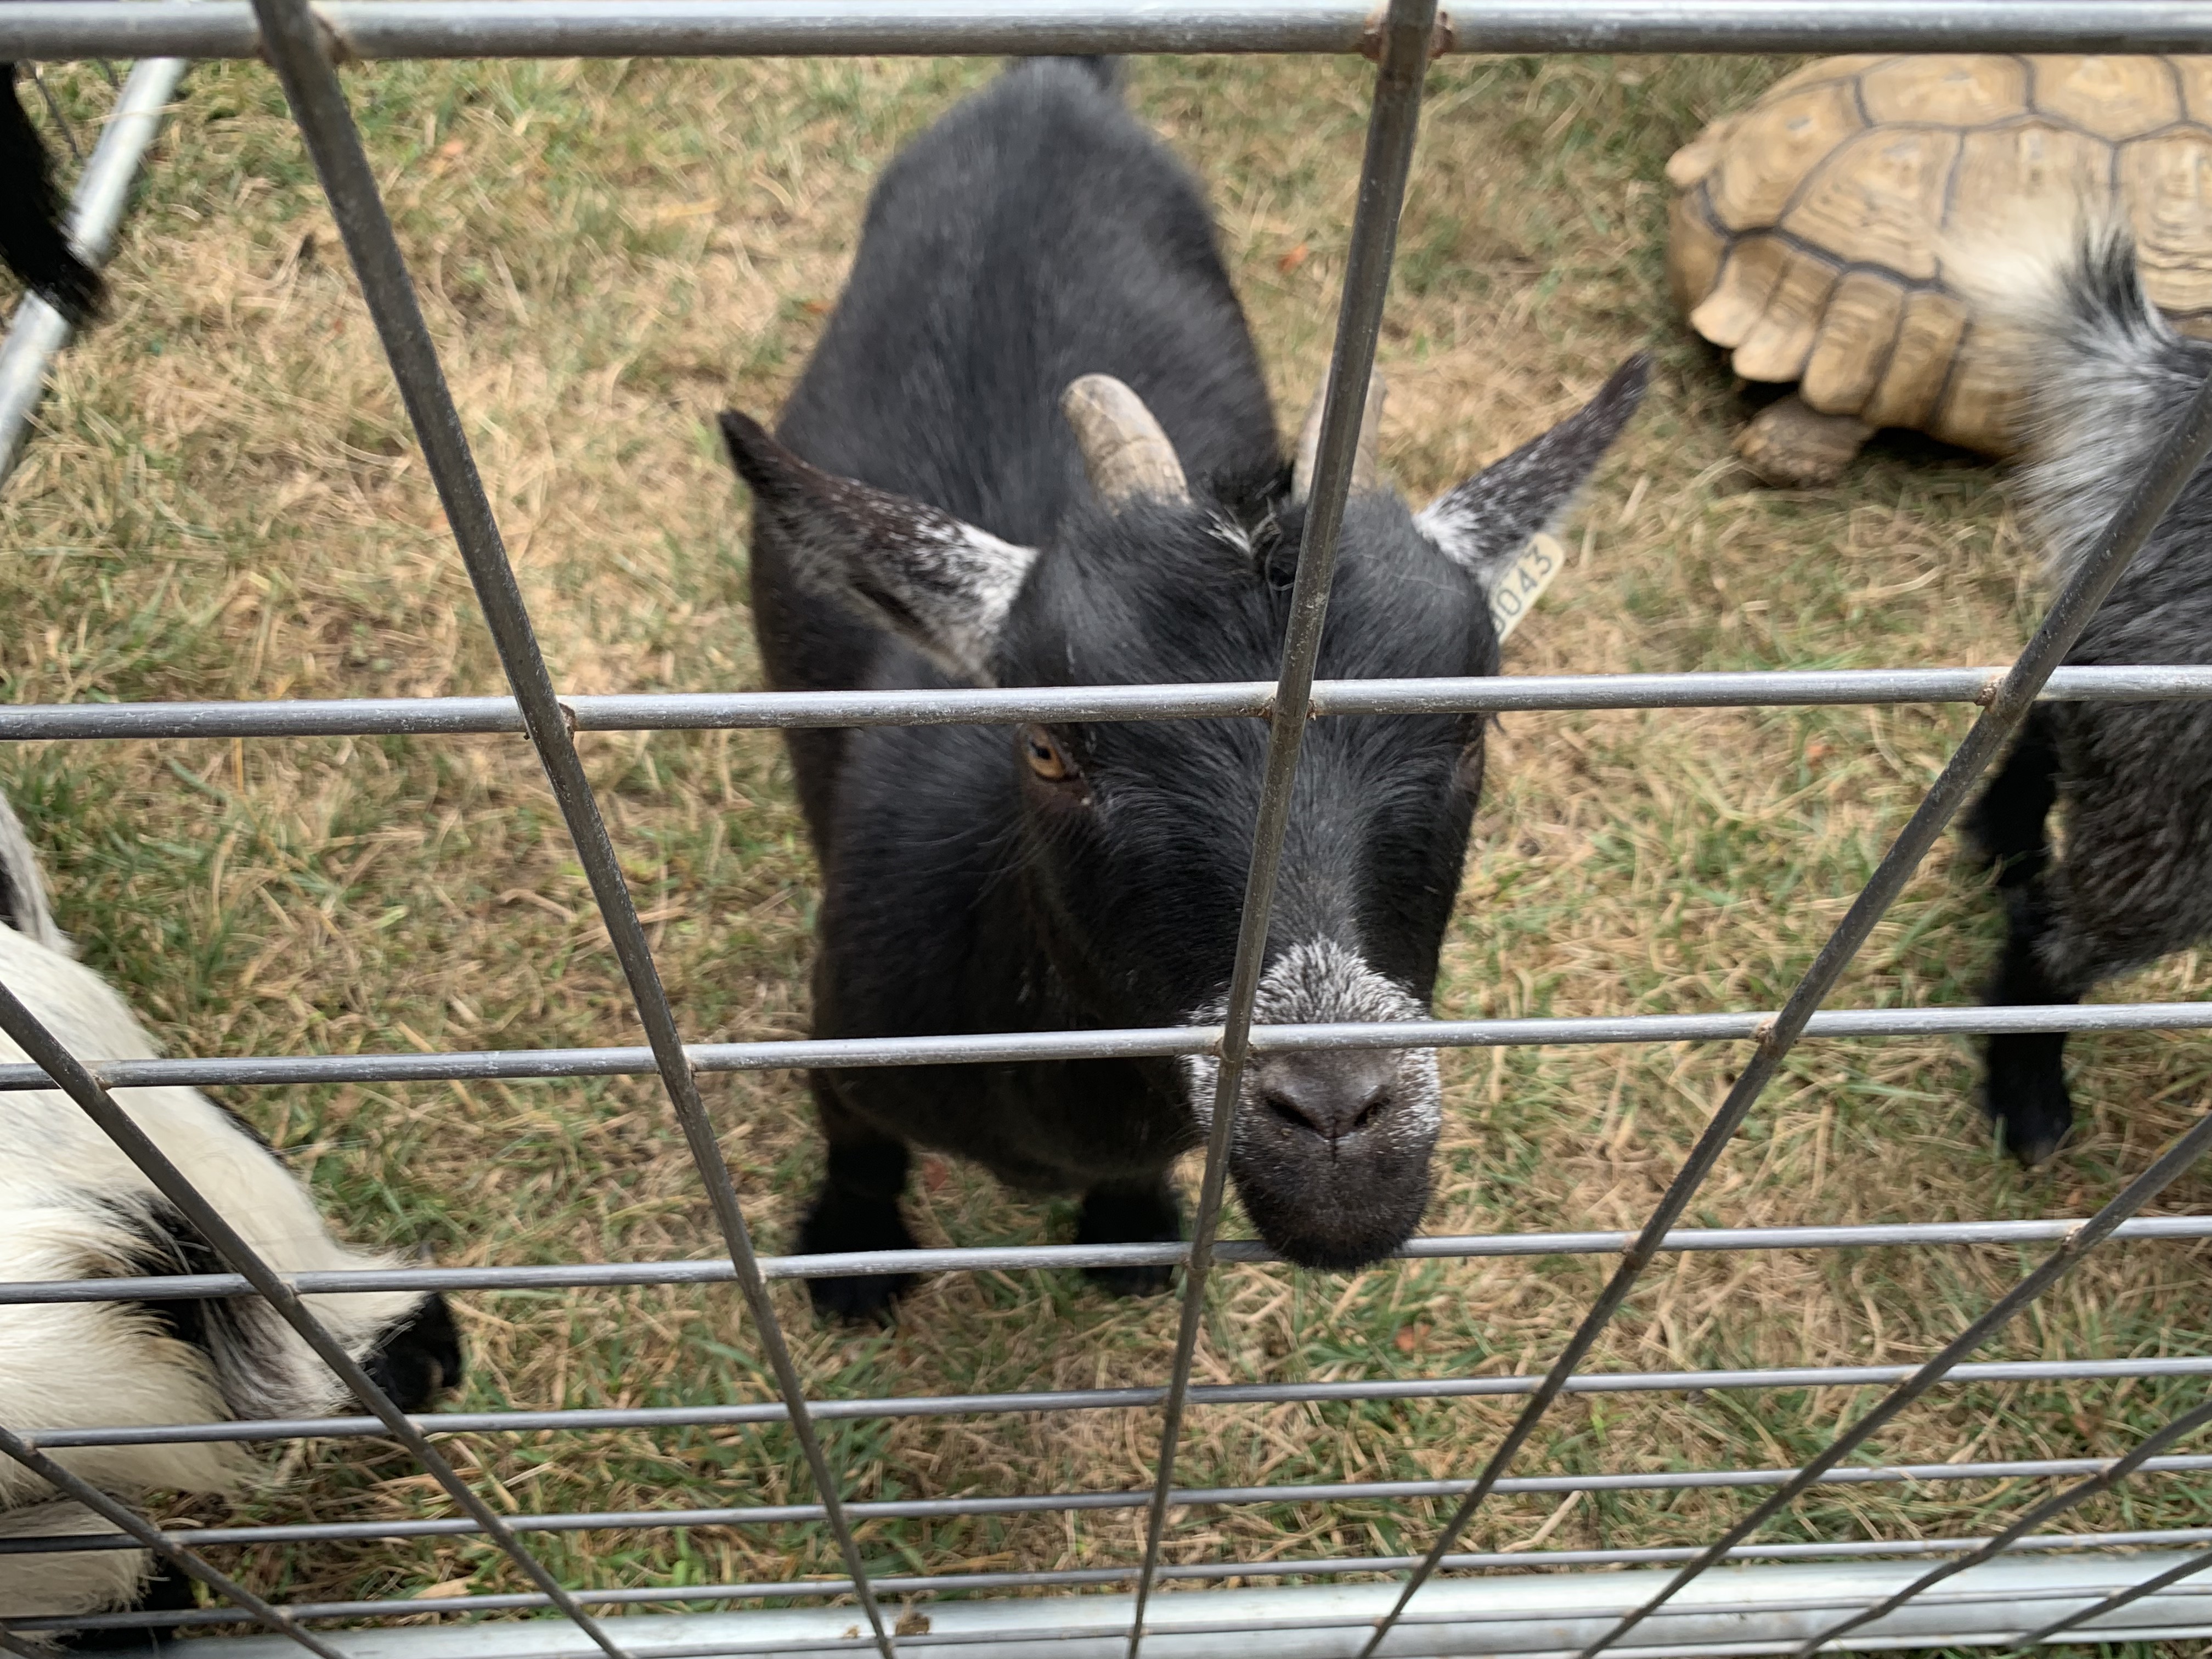 Petting zoo comes to OWU